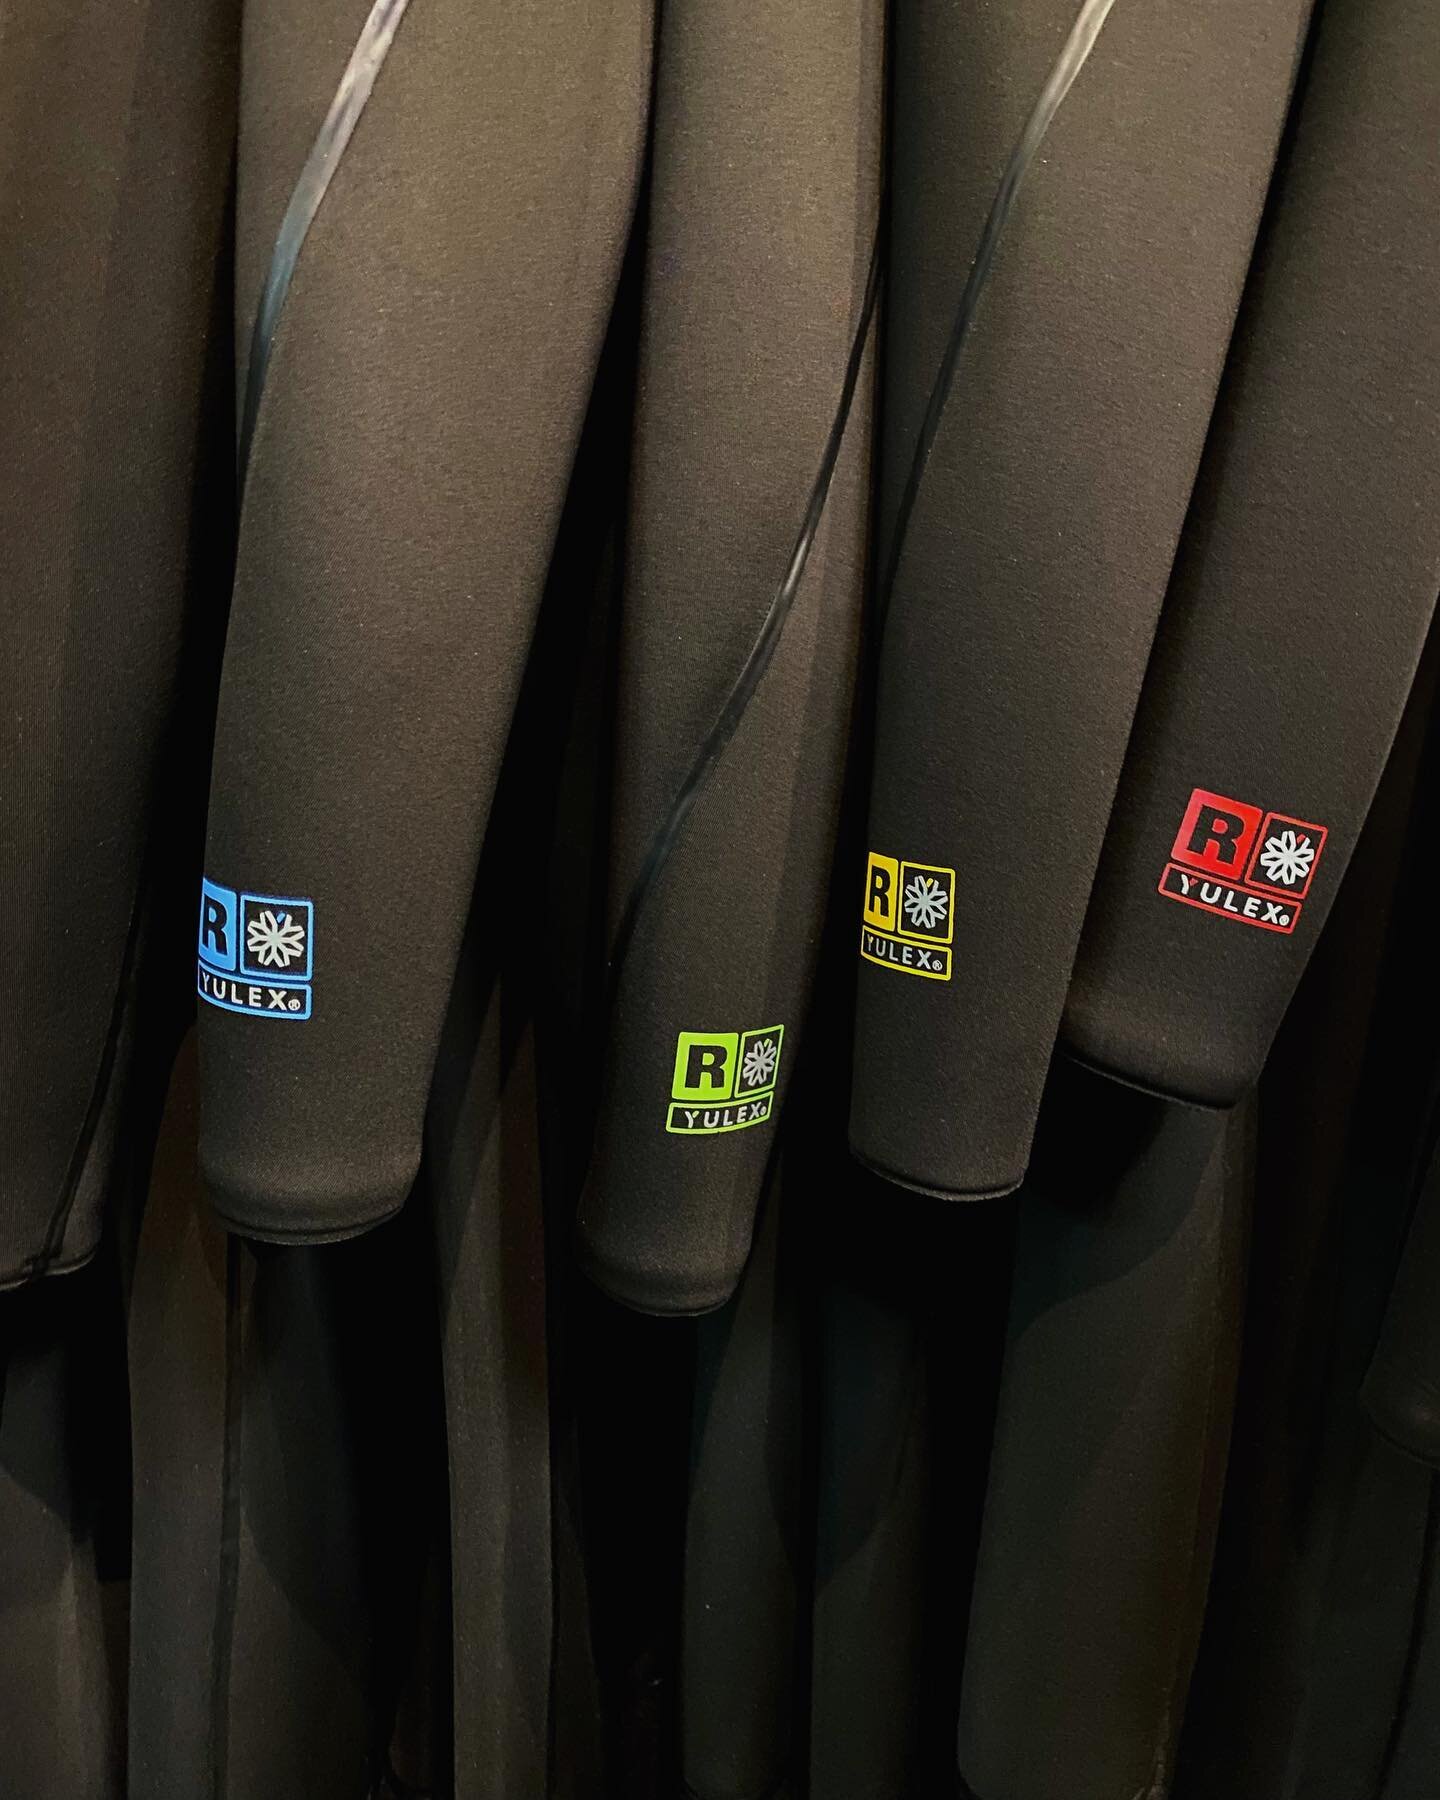 All R1-R5 full suits are 40% off through April 19th, come check them out in store, we&rsquo;re open Monday through Saturday 10am - 5pm!